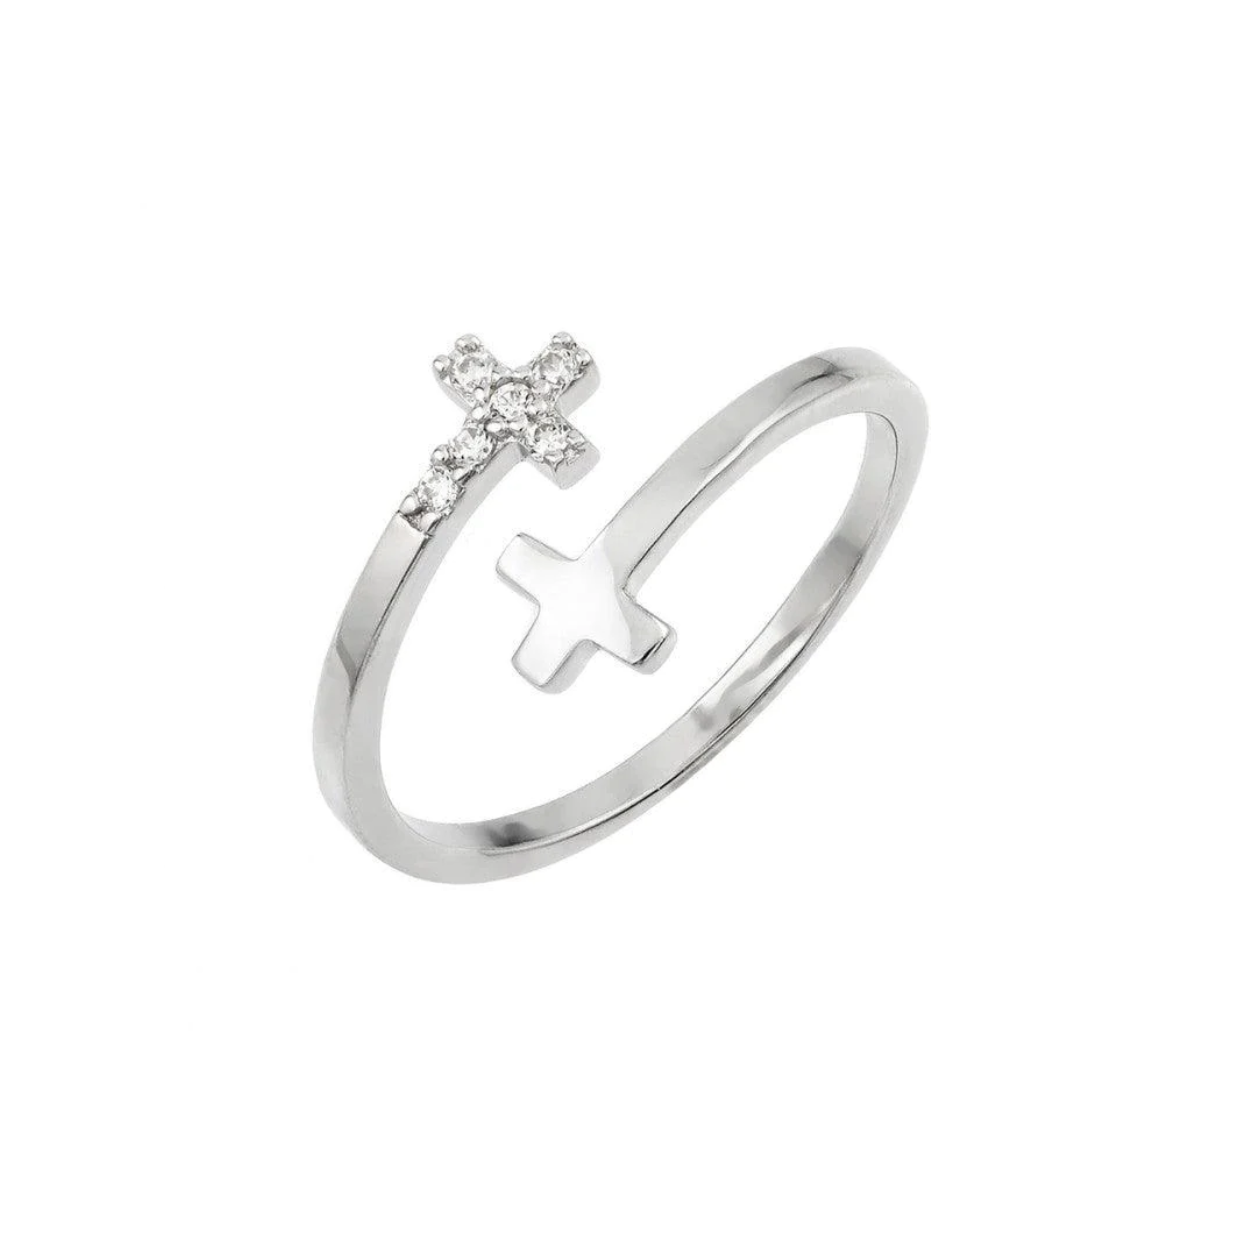 Silver 925 Rhodium Plated
CZ Double Cross Ring